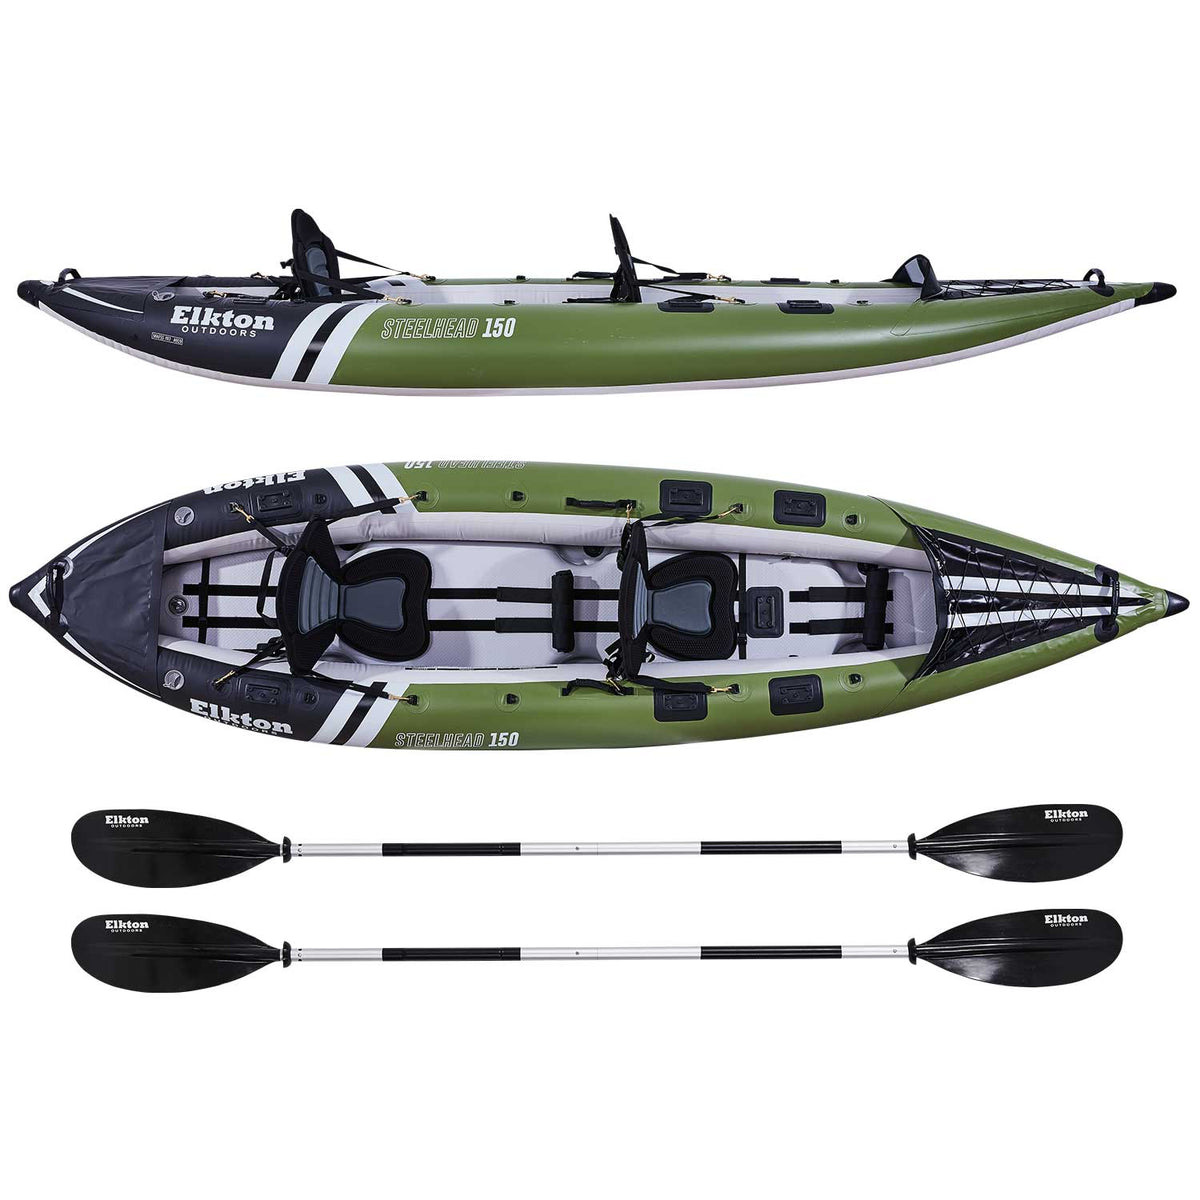 Elkton Outdoors Comorant 2 Person Tandem Inflatable Fishing Kayak, 10-Foot with EVA Padded Seats, Includes 2 Active Fishing Rod Holder Mounts, 2